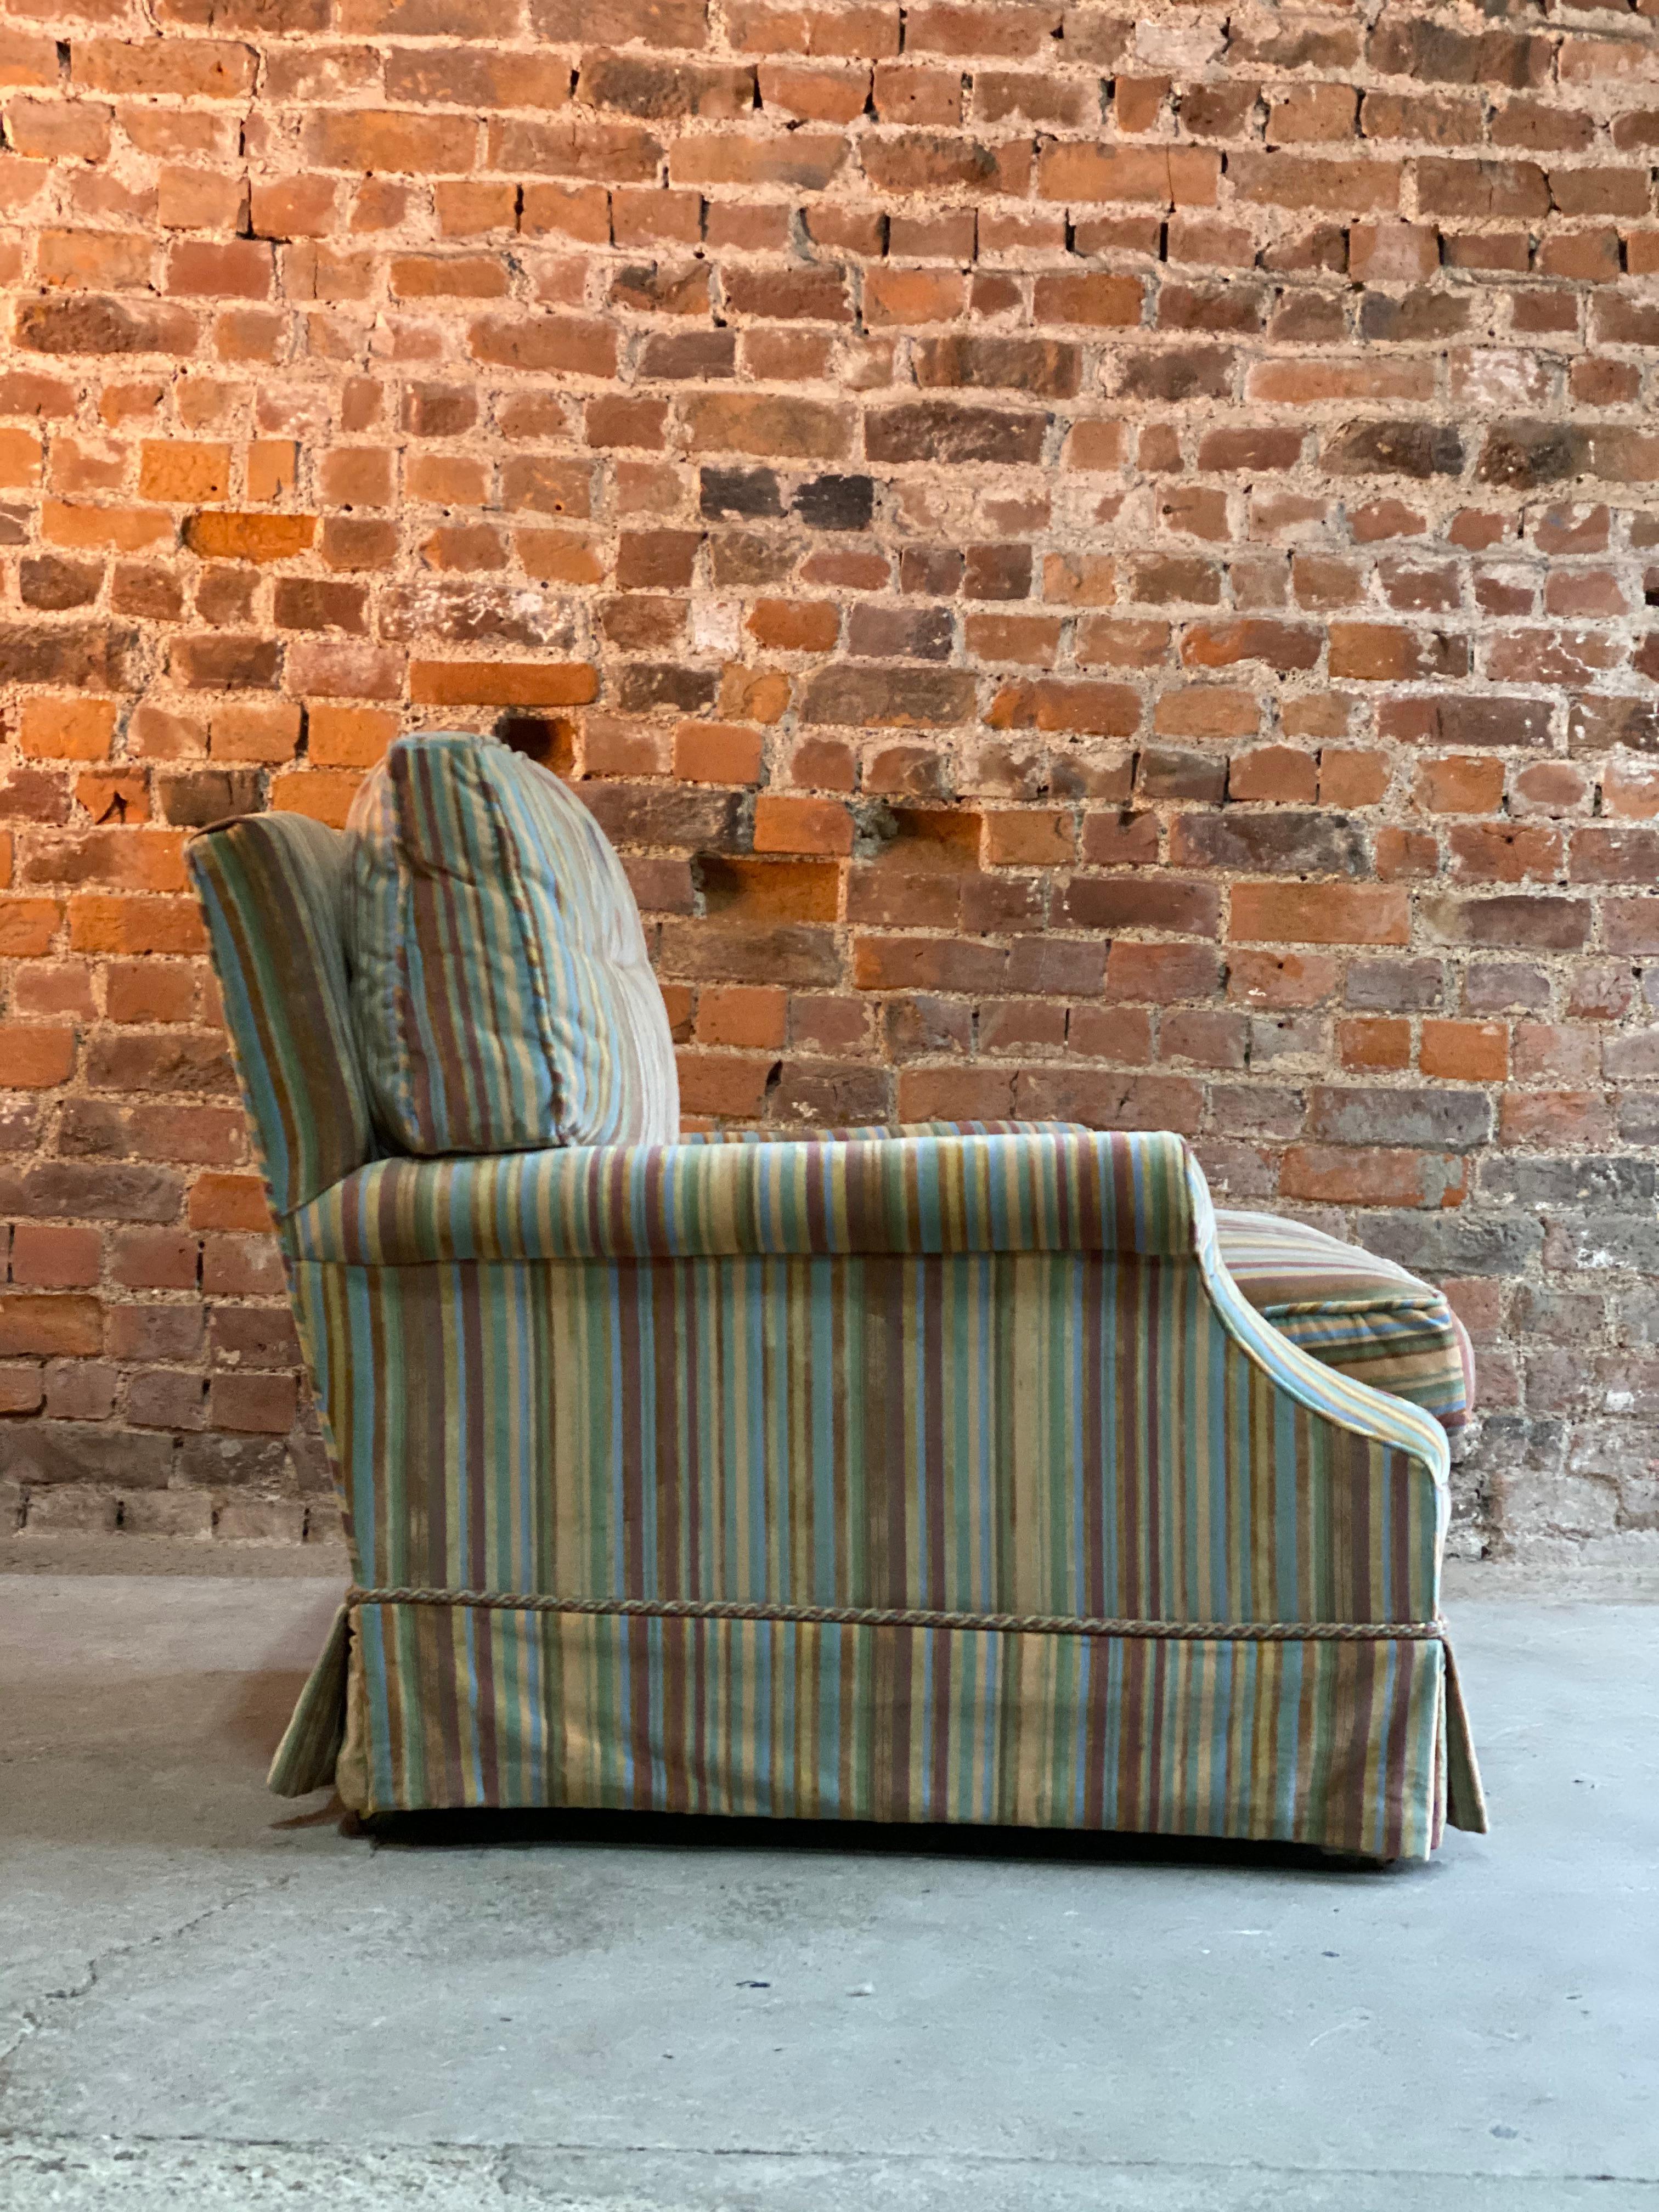 Howard & Sons Clayton armchair deep seated Rod Stewart Number 5

Sir Rod Stewart’s Essex home Howard & Sons loose cushion deep seated Clayton armchair , the armchair upholstered in a sumptuous striped velour upholstery, raised on medium beech